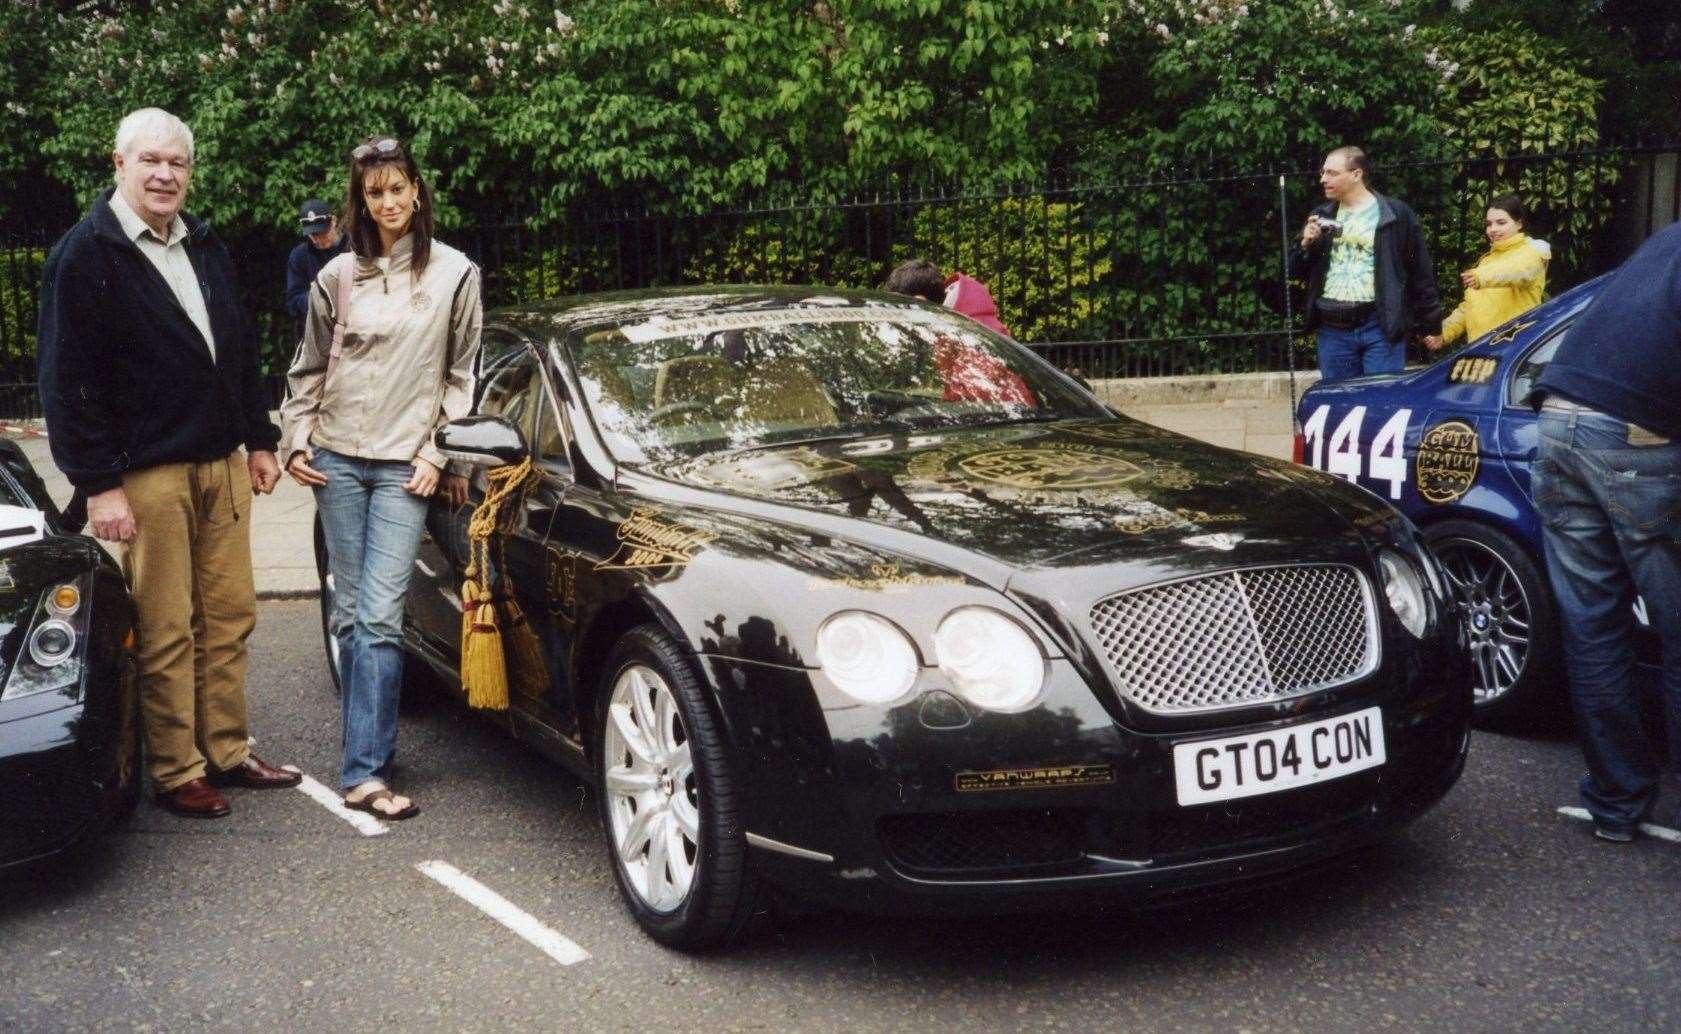 Emma Scott pictured in 2005 with her father David and the Bentley Continental GT in which she took part in